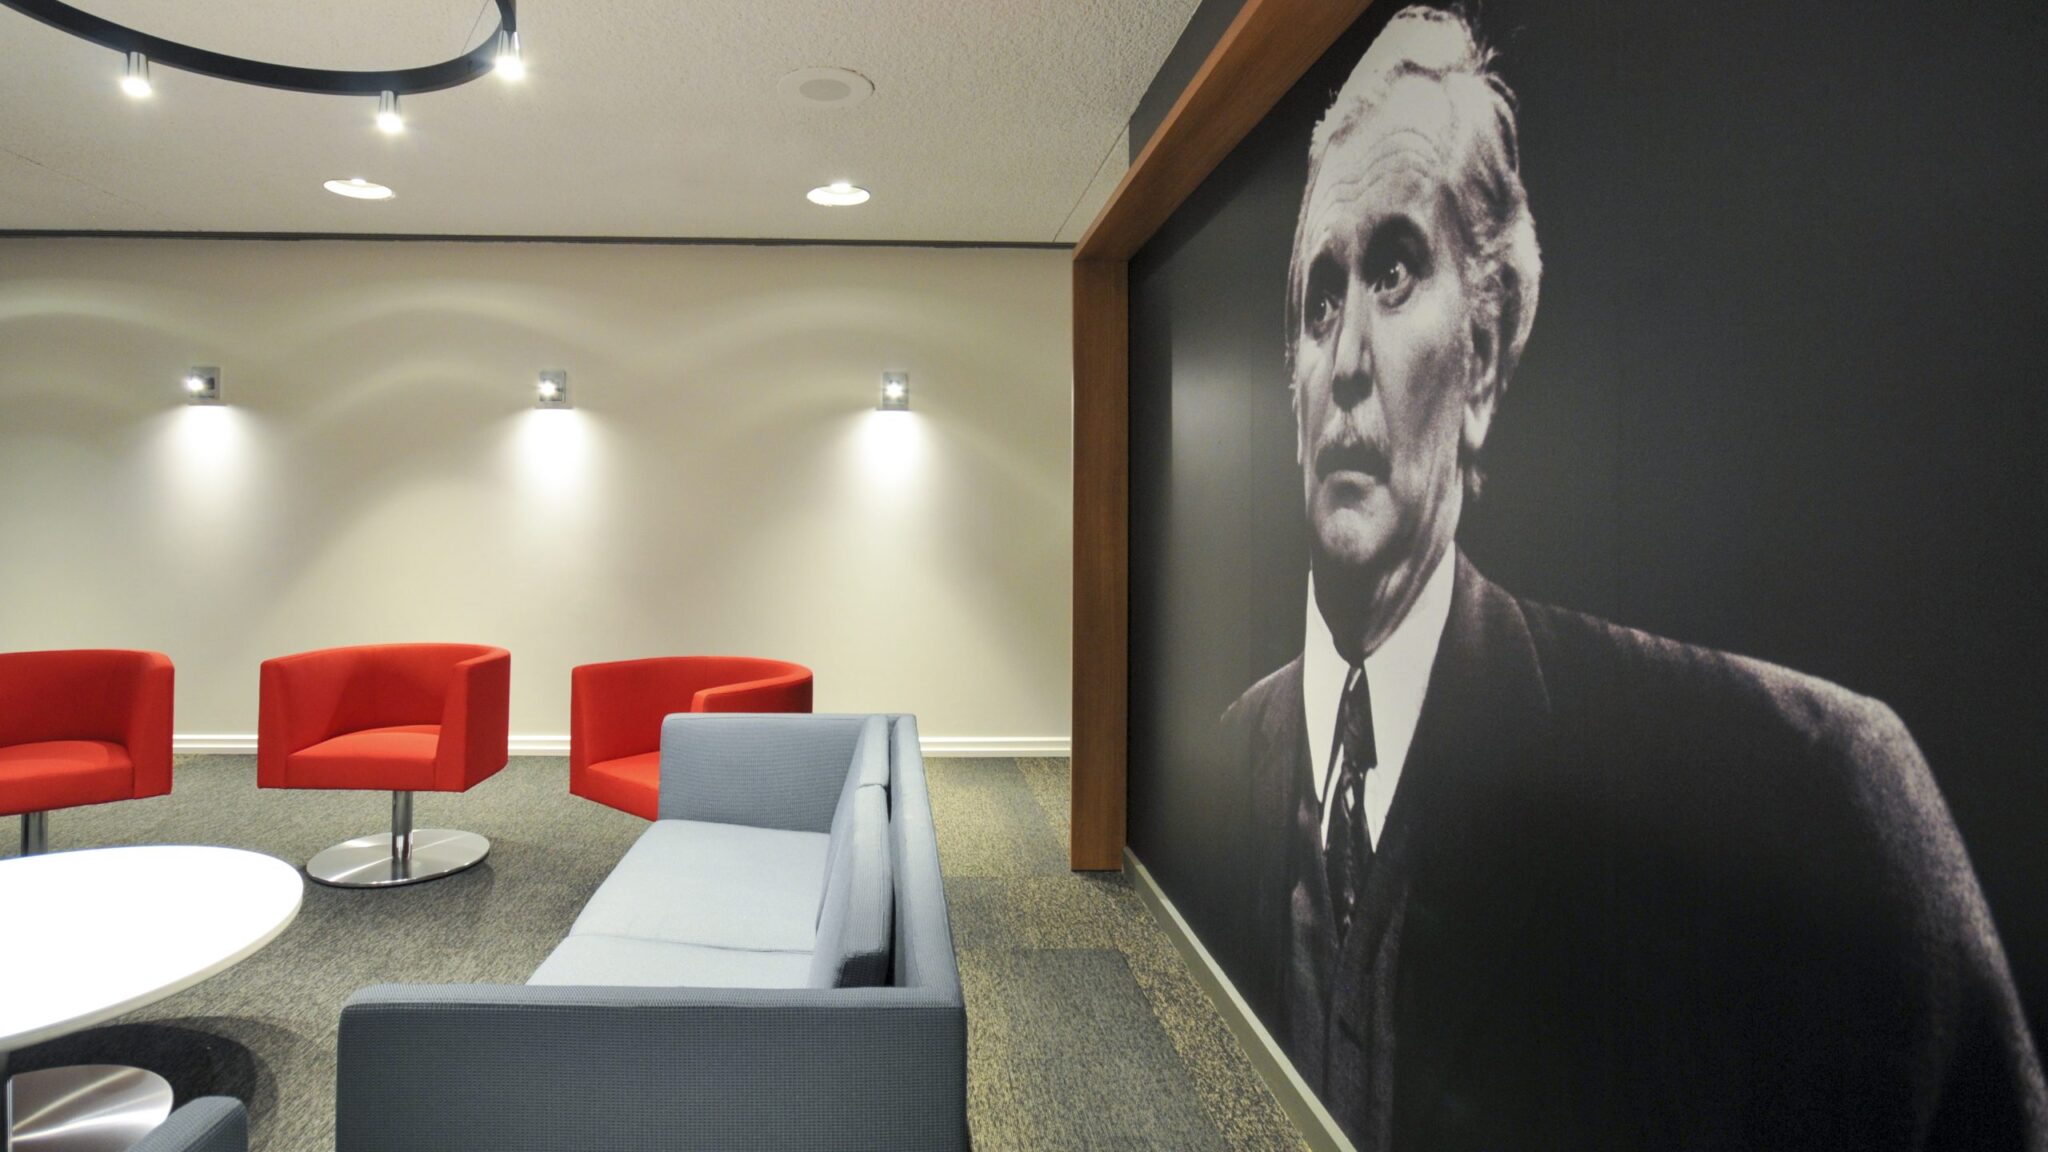 Jean Duceppe mural in the Green Room at Duceppe Theatre designed by VAD